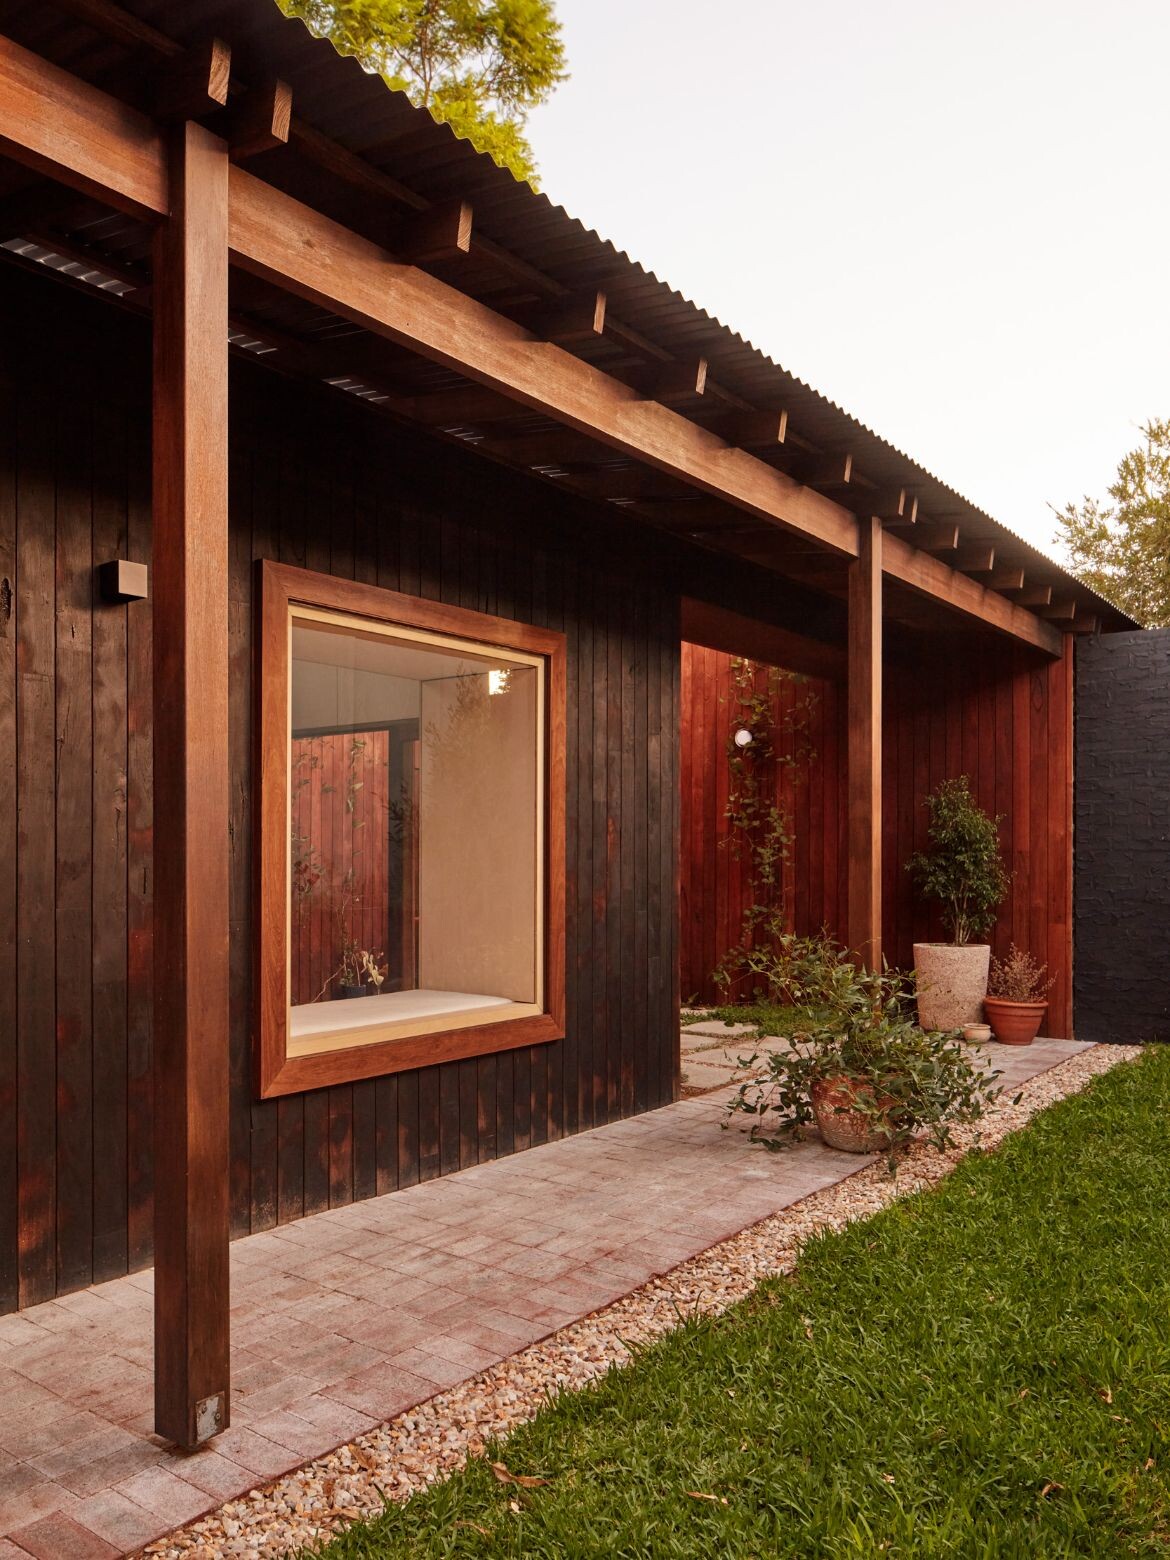 The new addition features hand-charred timber cladding